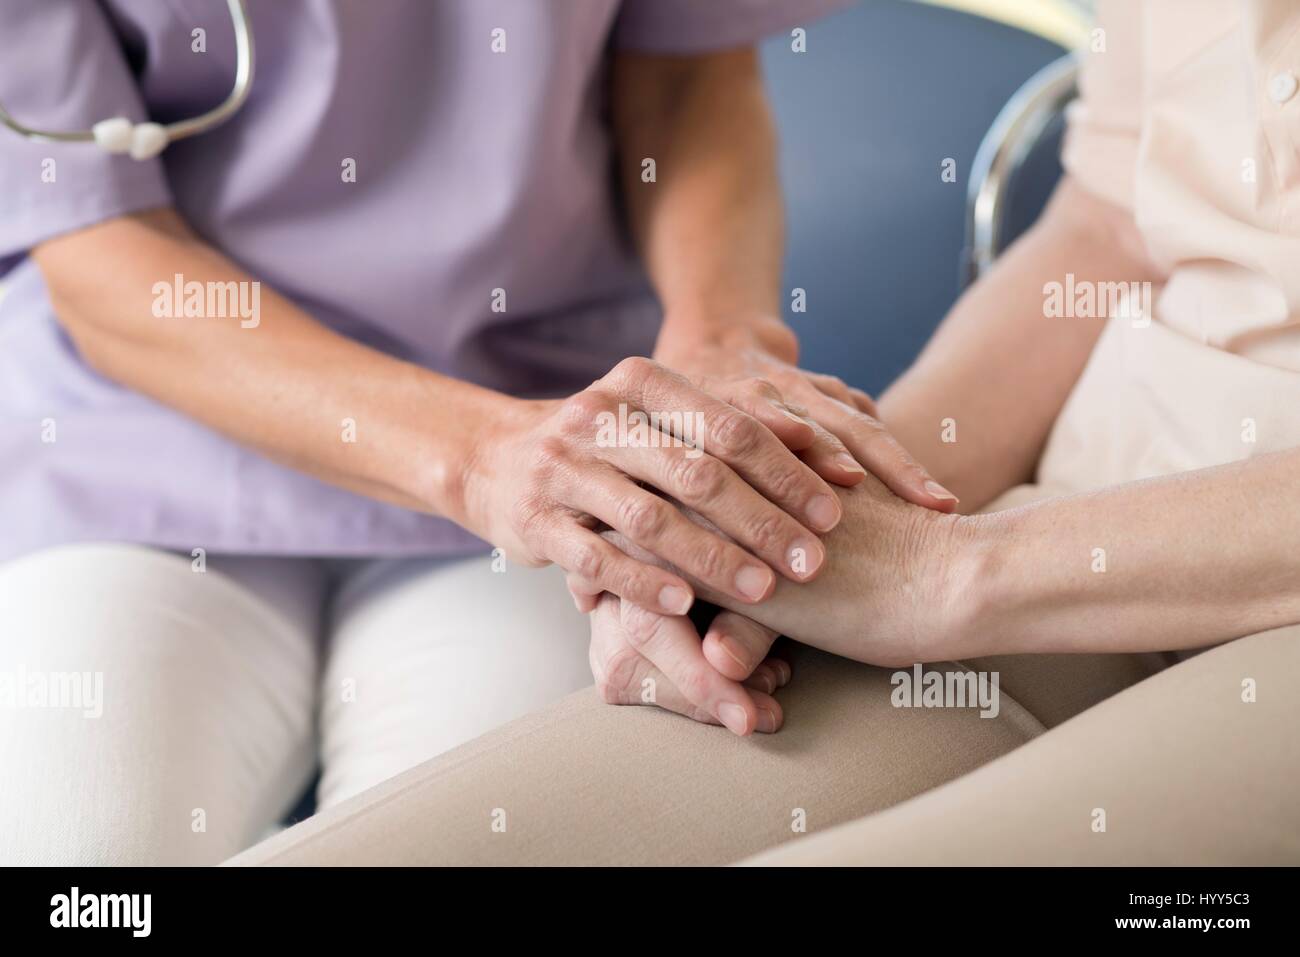 Care worker holding senior woman's hands. Banque D'Images